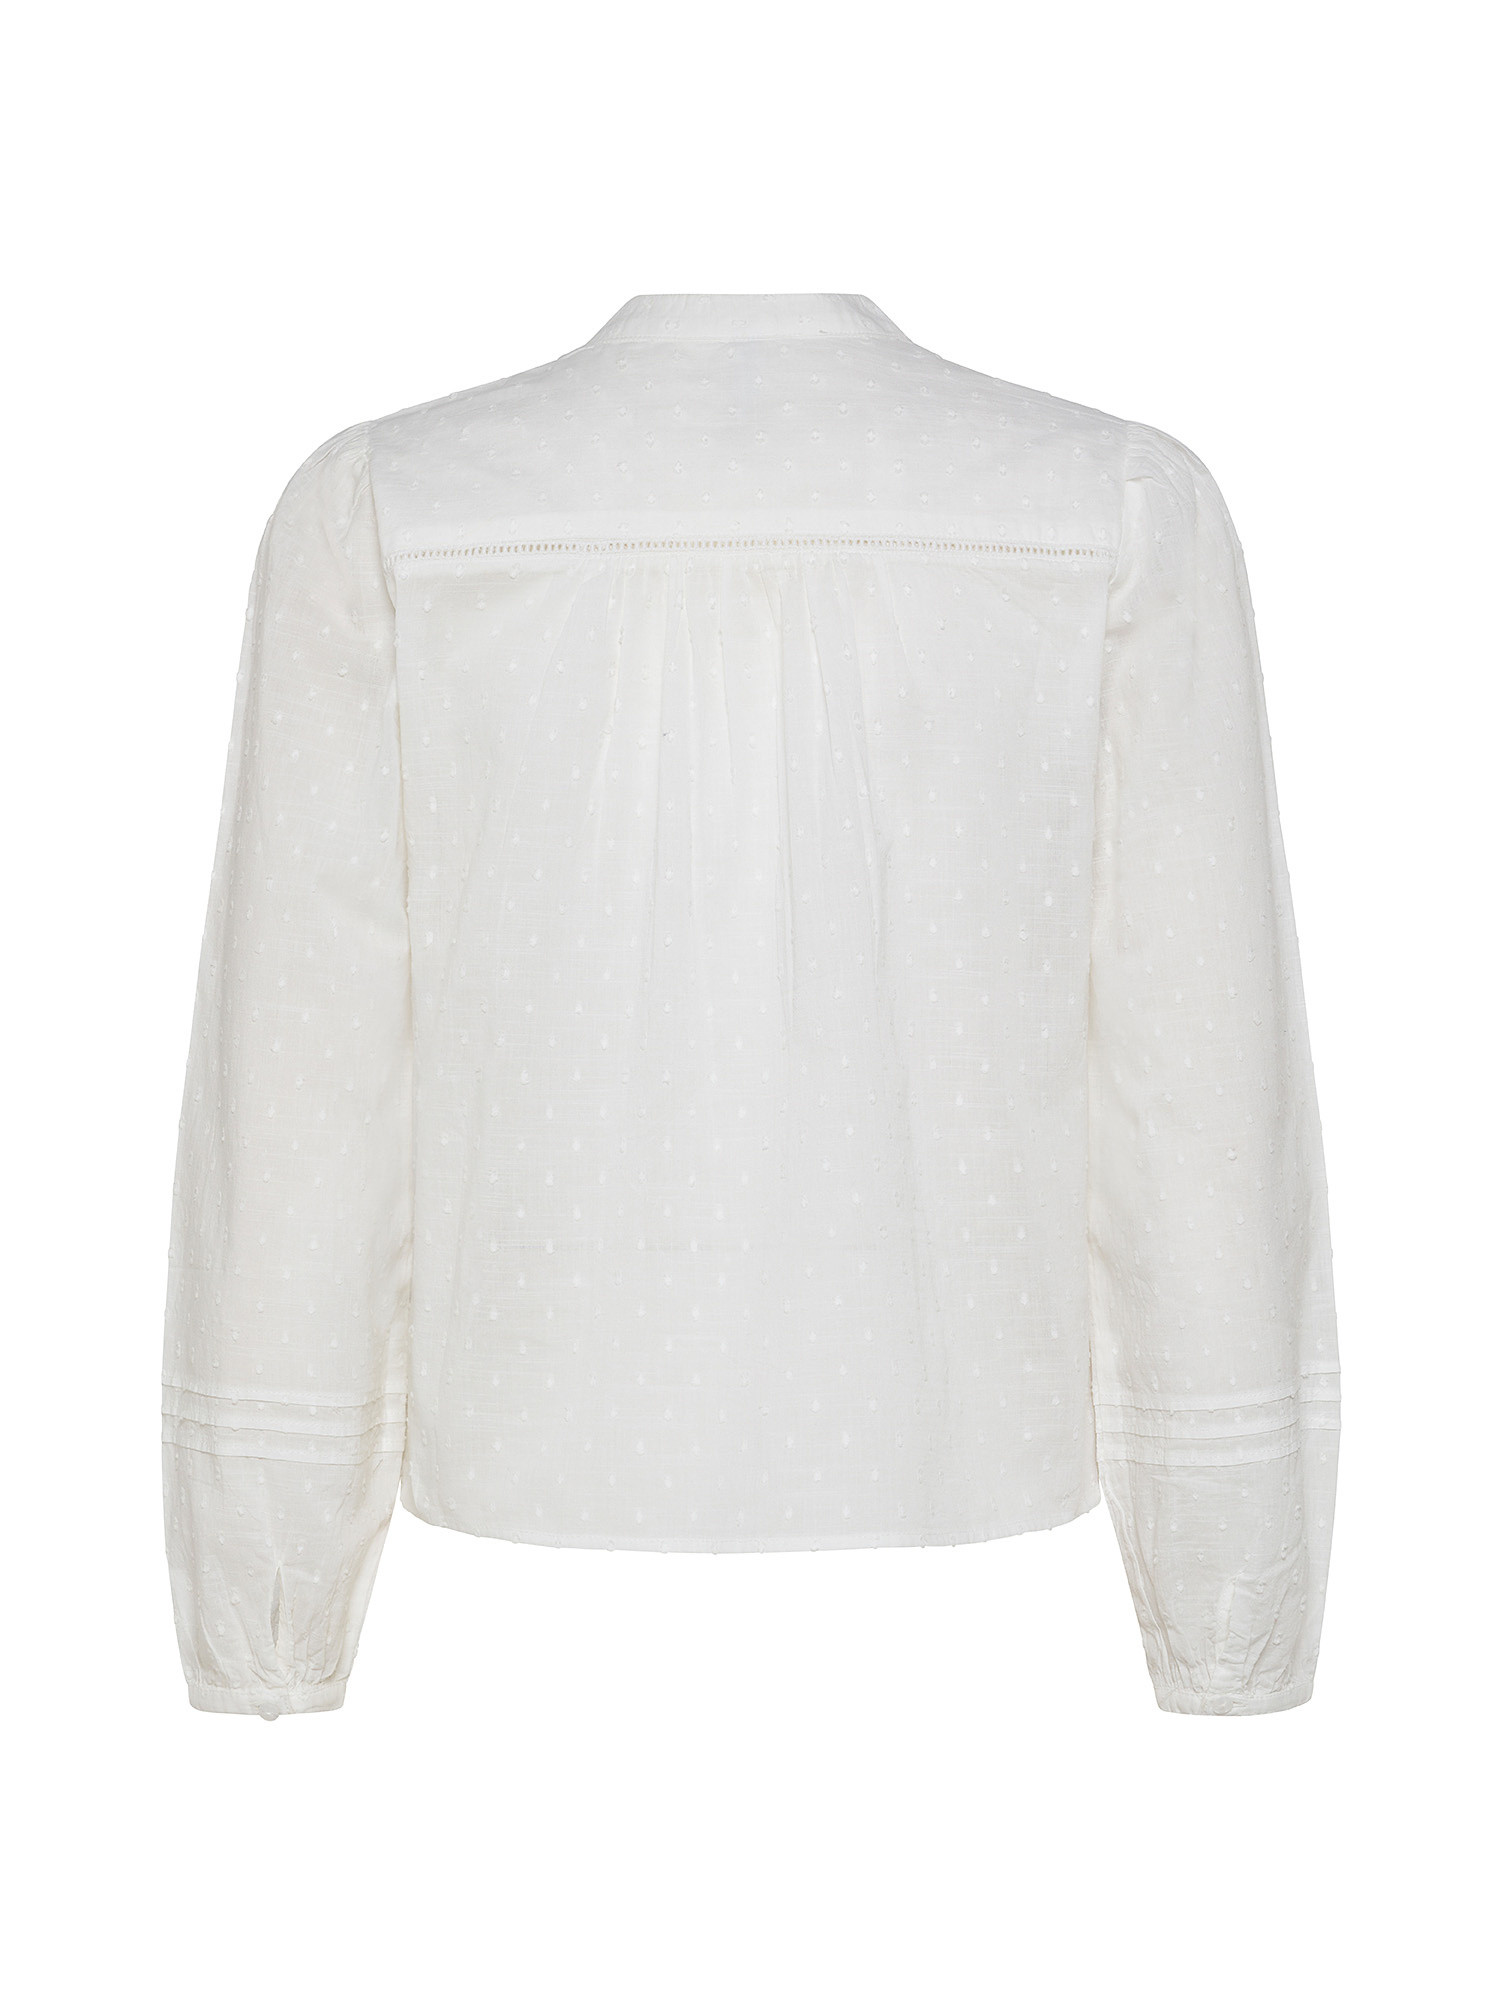 Pepe Jeans - Cotton blouse with embroidery, White, large image number 1